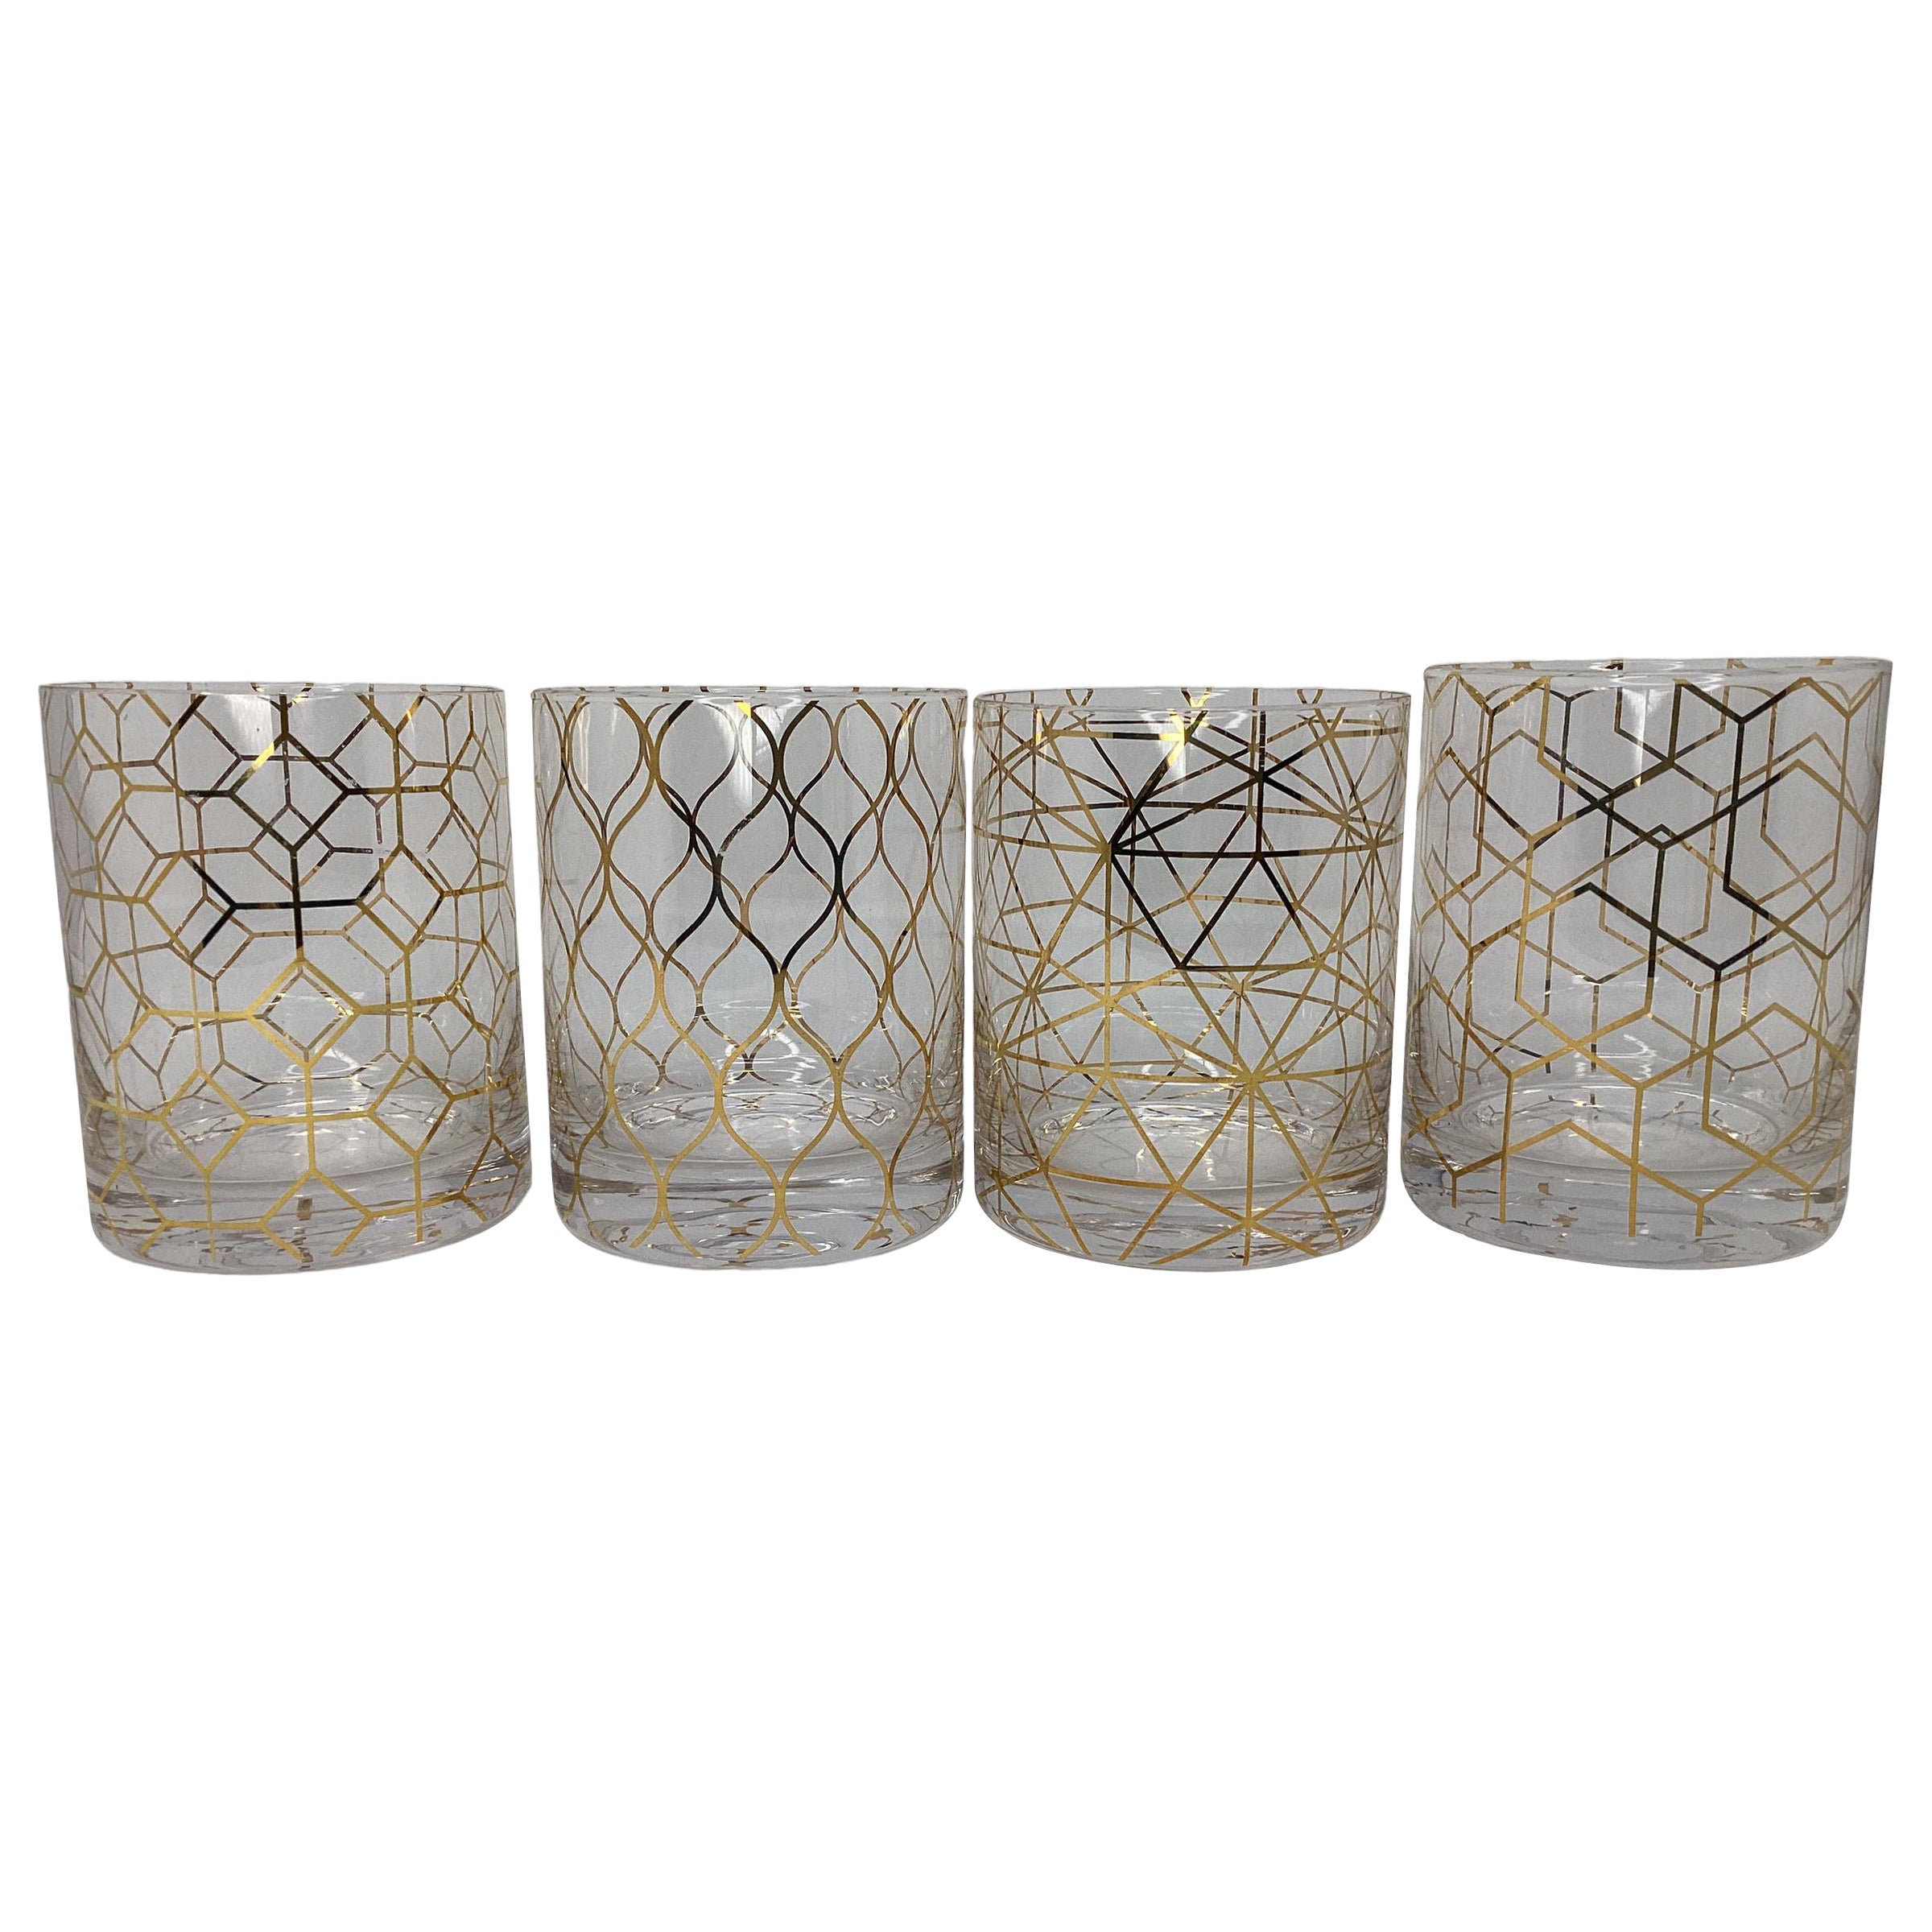 Set of Four Rocks Glasses with Geometric Shapes 